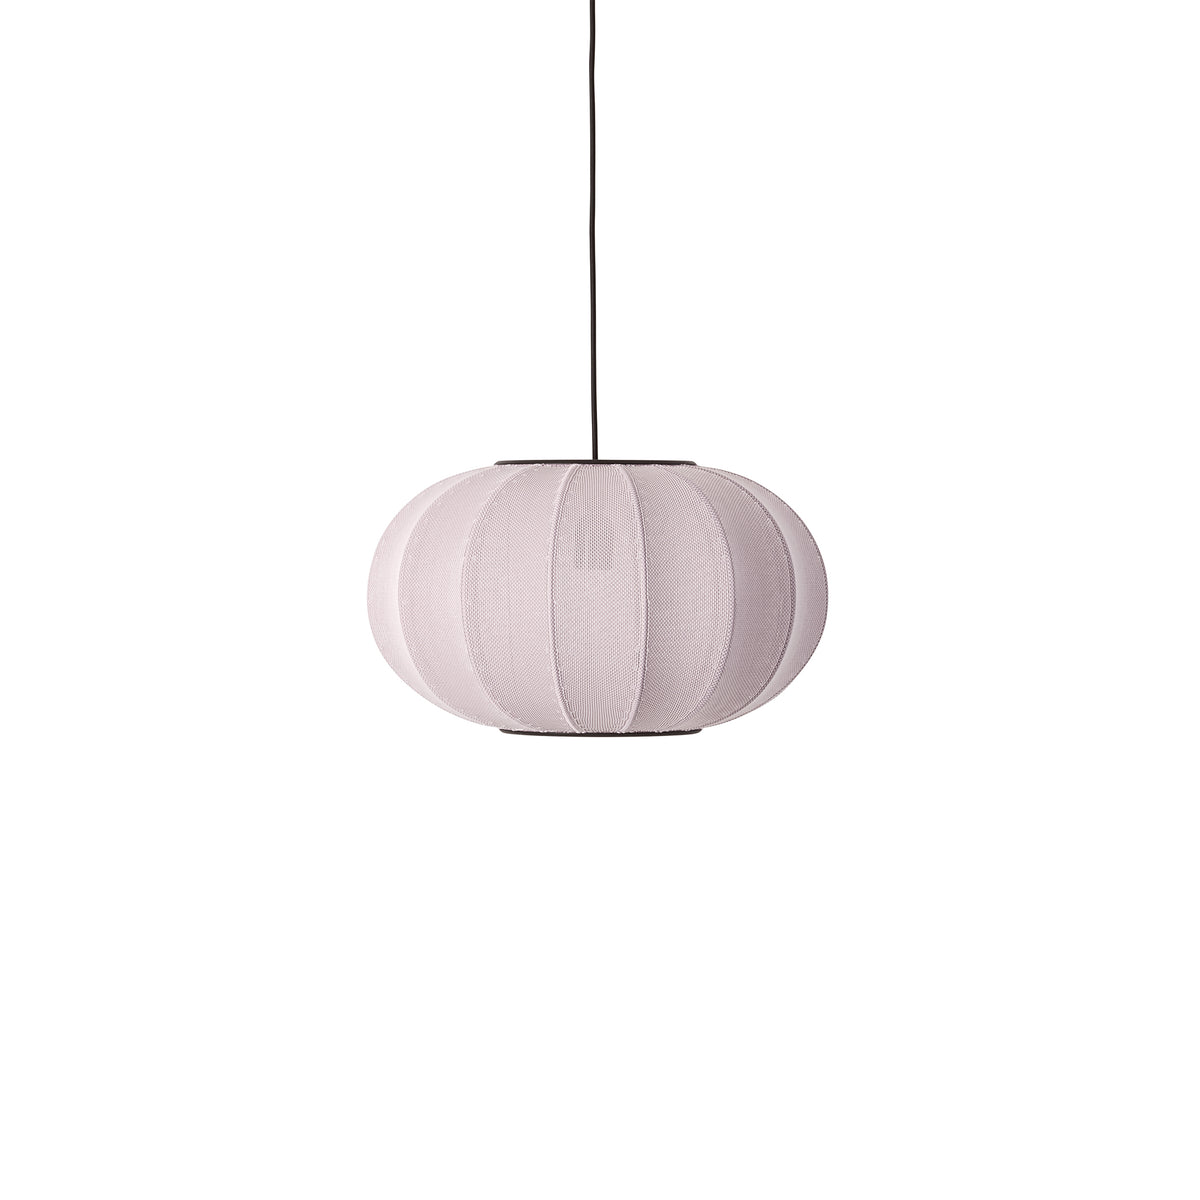 Made by Hand, Knit-Wit Oval Pendant Lamp 45, Sandstone, Pendant,